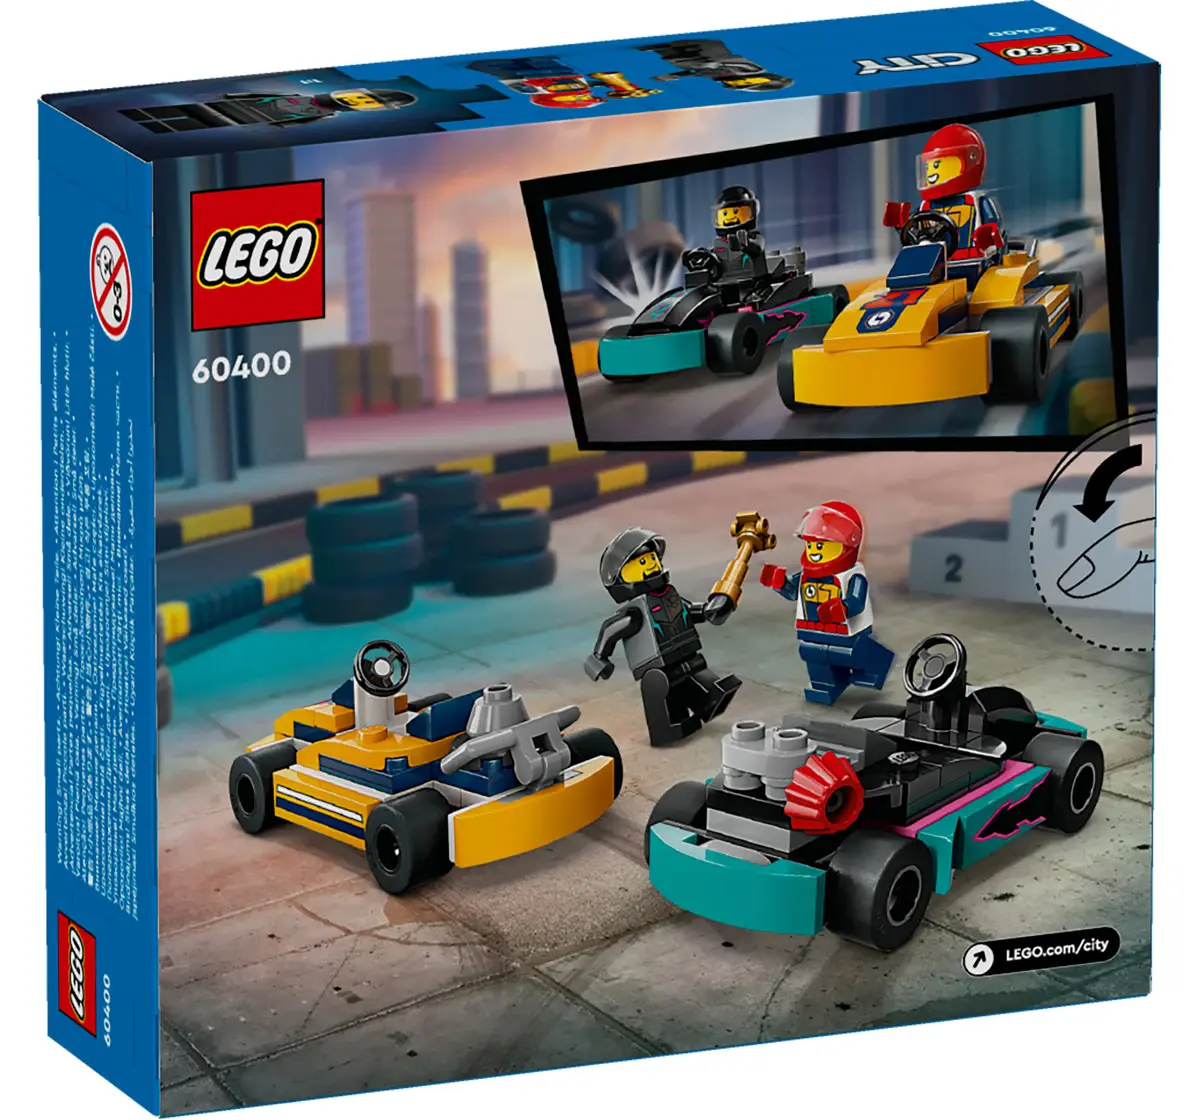 Lego City Go-Karts And Race Drivers Toy Set 60400 Multicolour For Kids Ages 5Y+ (99 Pieces)